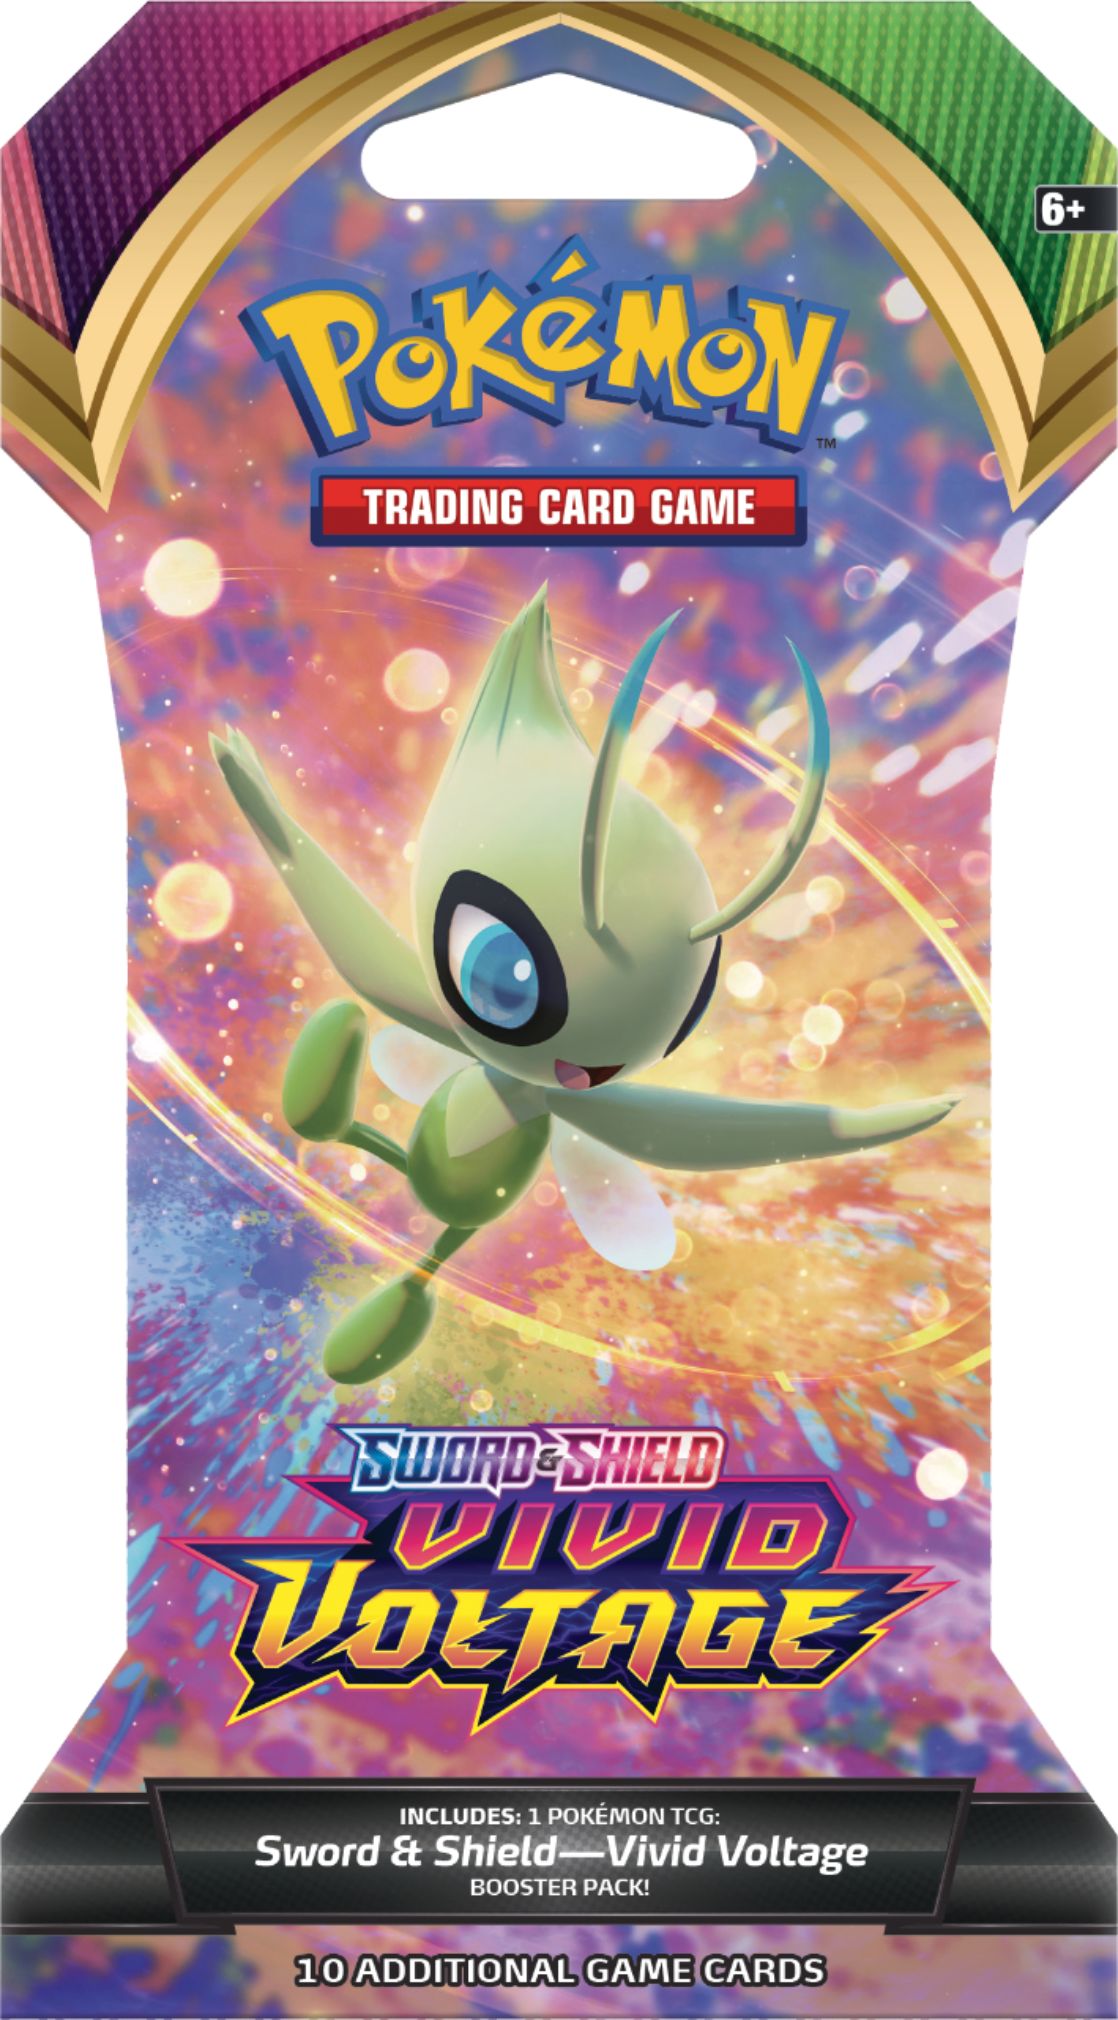 How much does a booster pack of pokemon cards cost Pokemon Tcg Sword Shield Vivid Voltage Sleeved Booster 175 82750 Best Buy